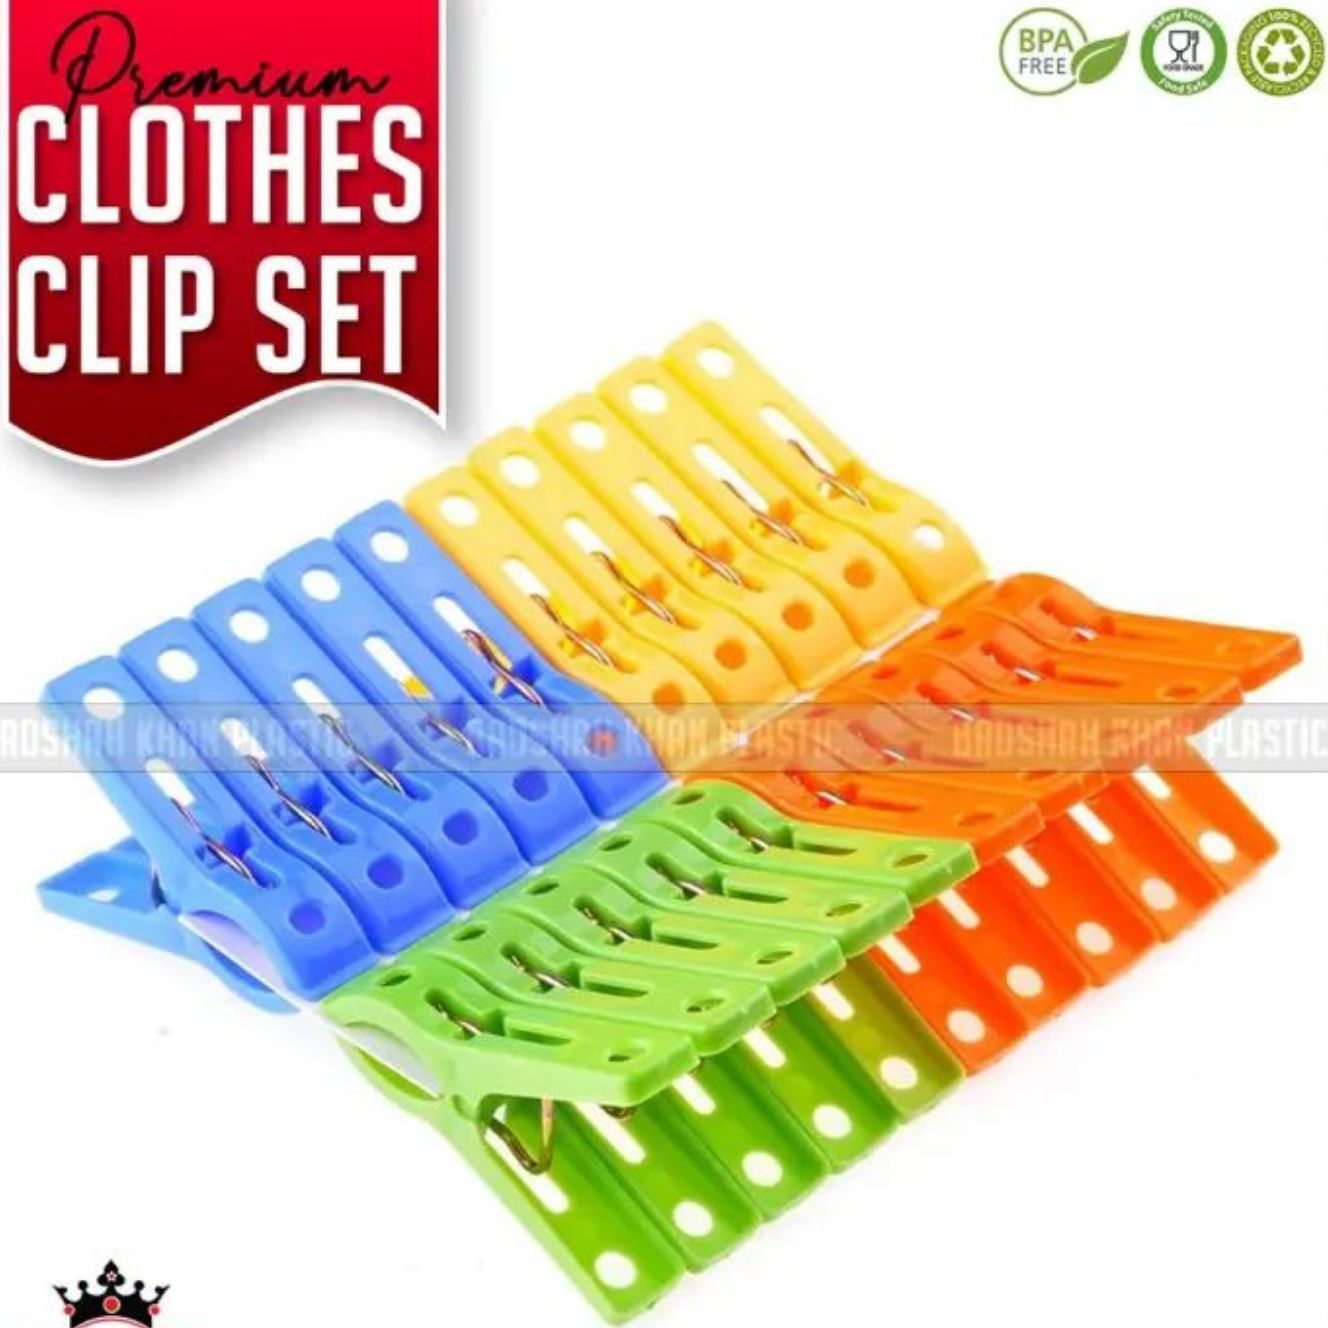 Baby Clothes Hanger with 16 clips - Clothes Drying Hanger with 16 Clips,  Baby Clothes Drying Rack, Sock Clips for Laundry Foldable Clothes Hangers  for Drying Socks, Towels, Underwear, Bras, Diapers, Baby